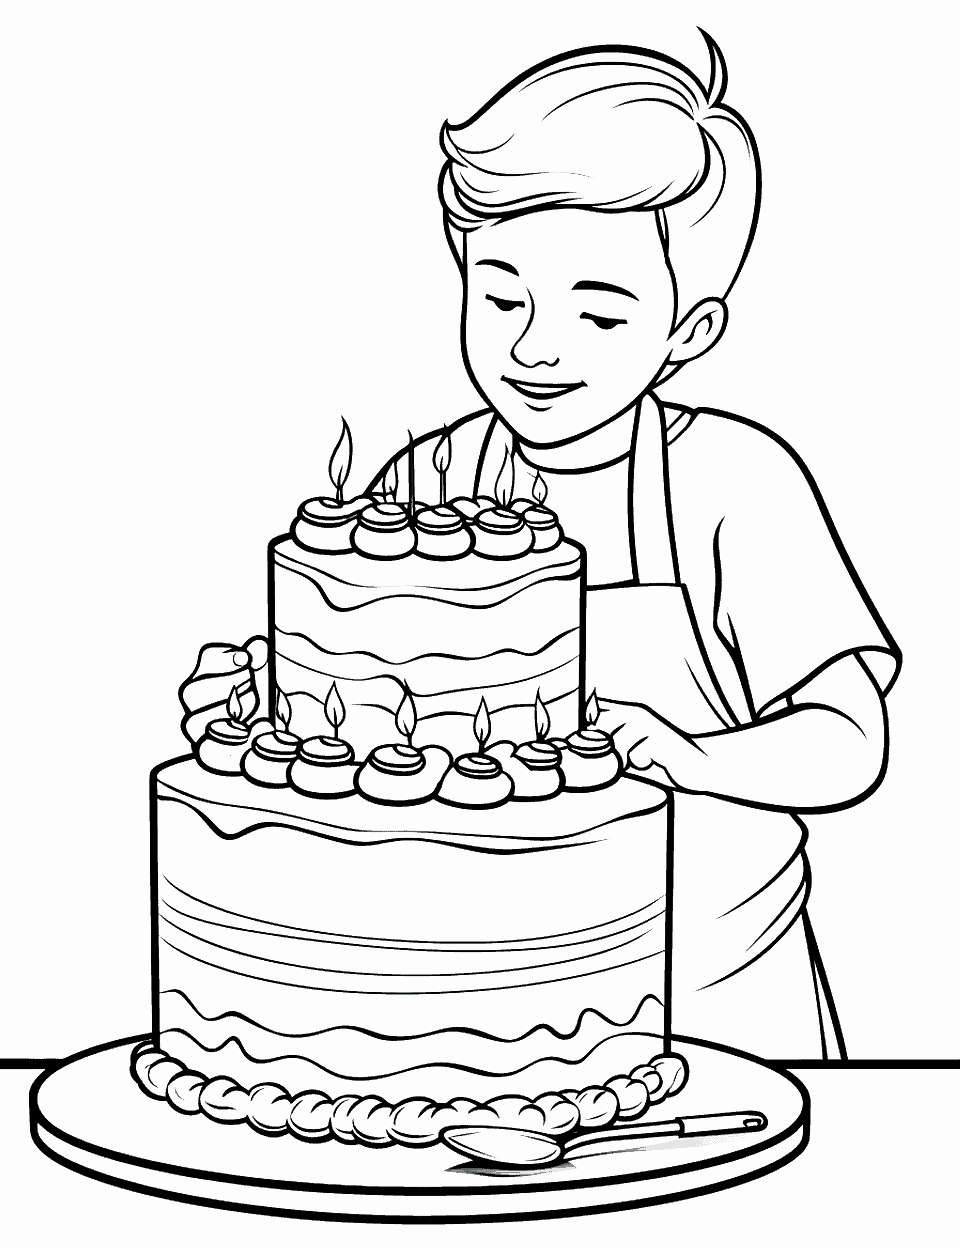 Pastry Chef Cake Coloring Page - A chef decorating a cake for a big party this weekend.